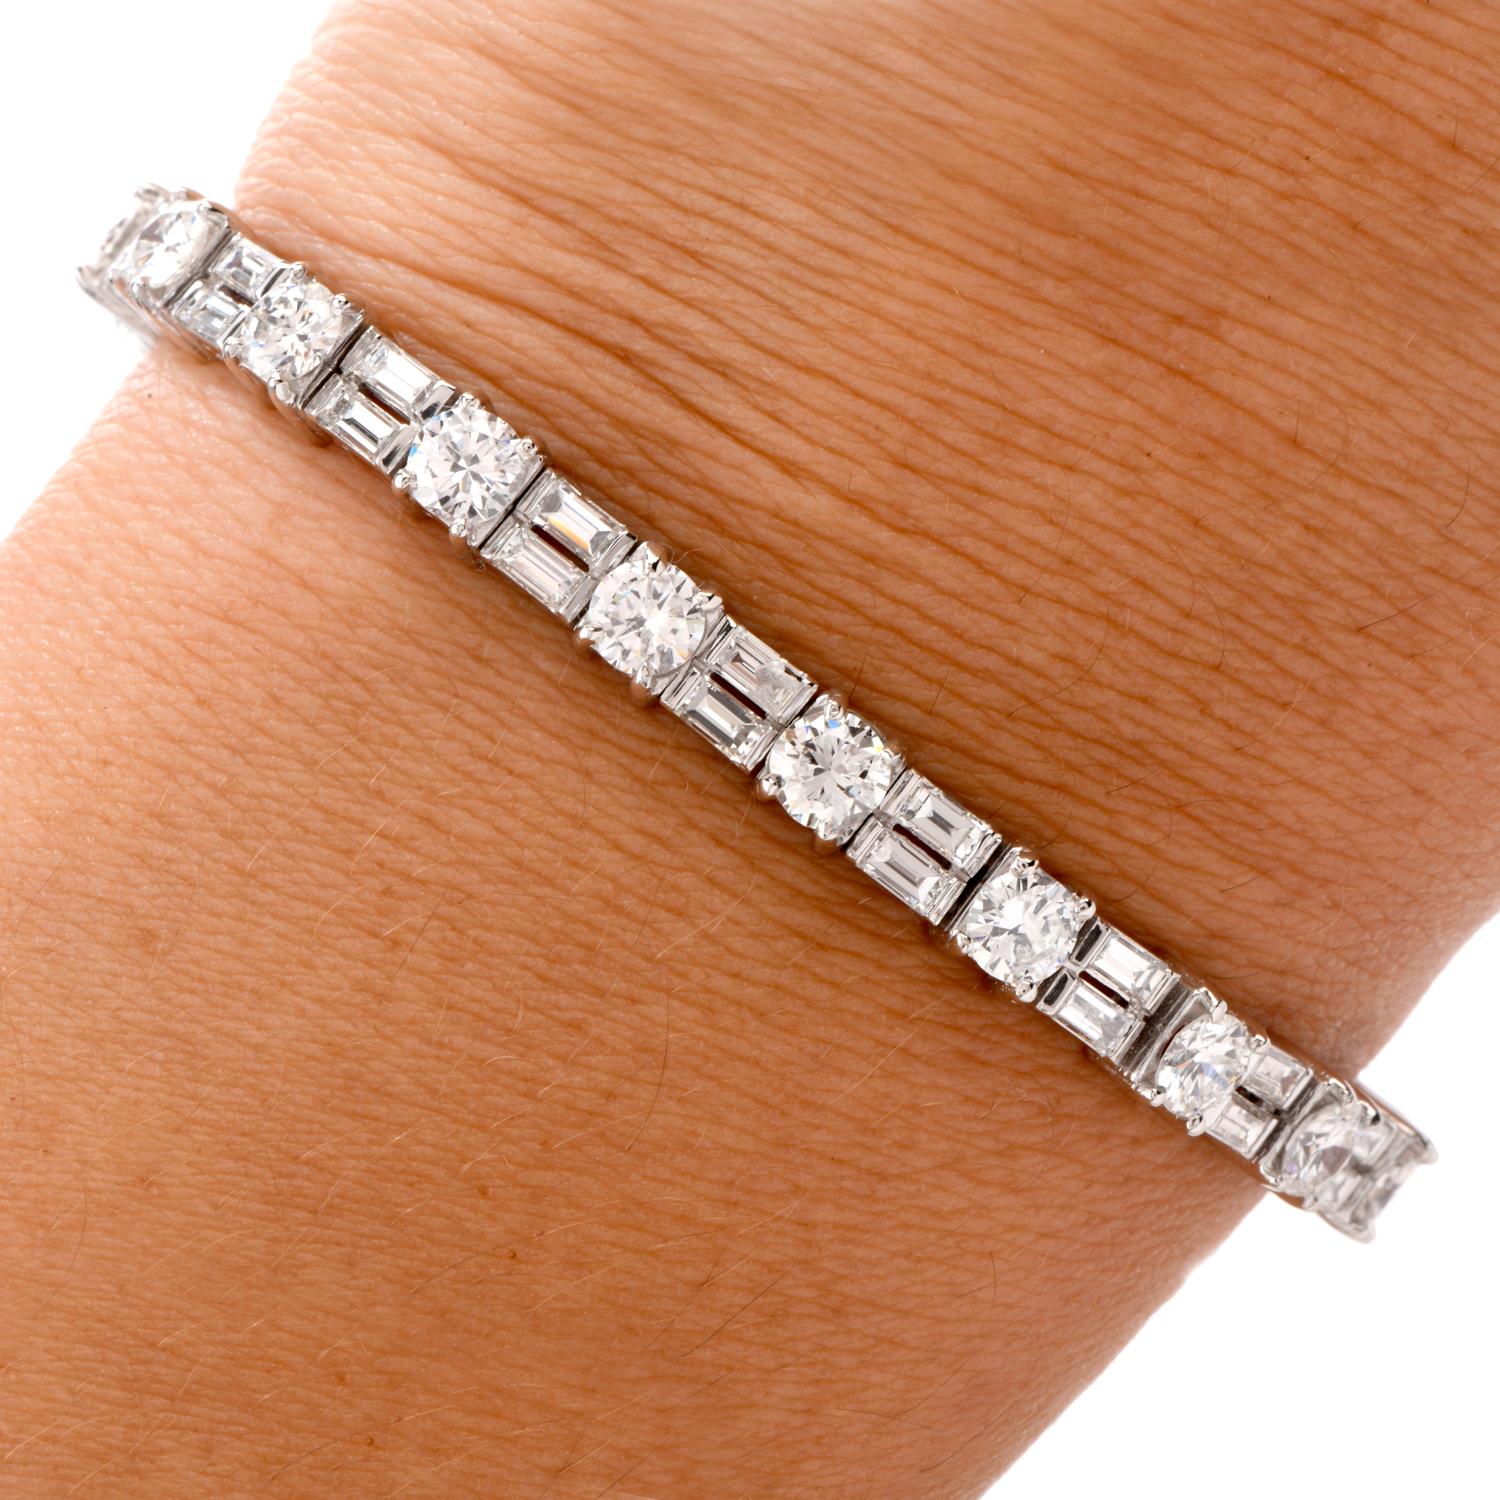 This stately bracelet boasts with vibrant white 20 round and 38 baguette-cut diamonds weighing cumulatively appx. 7.25 carats and are graded F-G color and VVS2-VS2 clarity.

Each link consists of 1 round and 2 baguette-cut diamonds. Spanning appx.